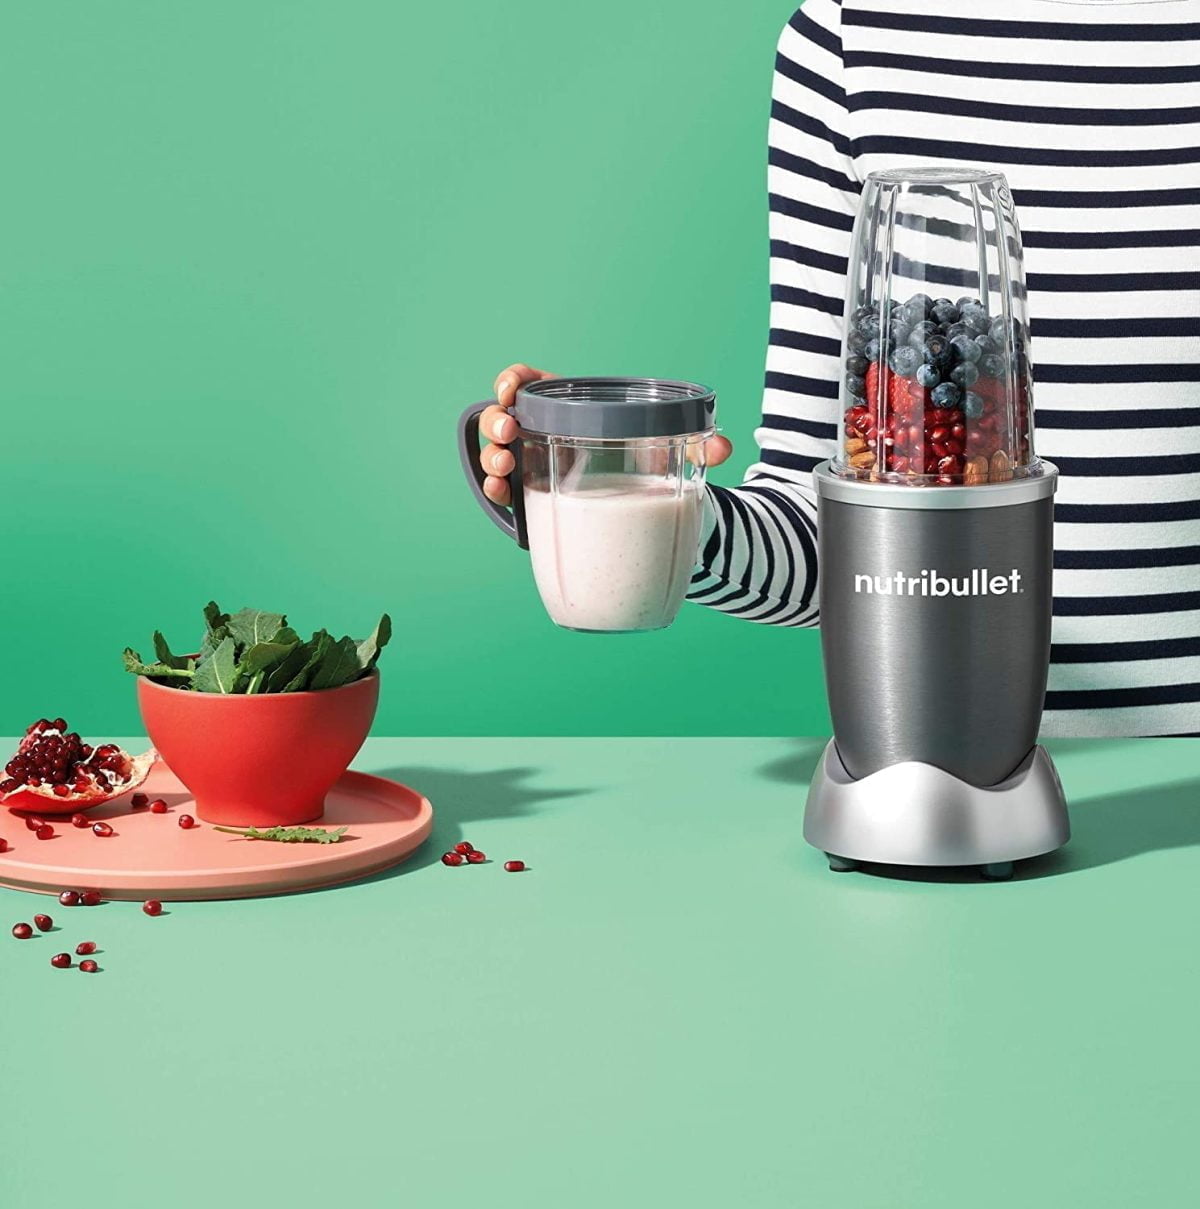 71S7Cp8Vabl. Ac Sl1500 Nutribullet &Lt;Ul Class=&Quot;A-Unordered-List A-Vertical A-Spacing-Mini&Quot;&Gt; &Lt;Li&Gt;&Lt;Span Class=&Quot;A-List-Item&Quot;&Gt;Meet The Most Popular Nutribullet, Our Compact-Yet-Powerful Personal Blender. You Choose What Goes In To Get The Most Out Of Every Ingredient, Every Day.&Lt;/Span&Gt;&Lt;/Li&Gt; &Lt;Li&Gt;&Lt;Span Class=&Quot;A-List-Item&Quot;&Gt;The Nutribullet Is The Fastest, Easiest Solution For Making Nutrient-Packed Smoothies. Load It Up With Your Favorite Whole Foods Like Nuts, Berries, And Spinach, Then Push, Twist, And Blend Your Way To A Healthier Lifestyle.&Lt;/Span&Gt;&Lt;/Li&Gt; &Lt;Li&Gt;&Lt;Span Class=&Quot;A-List-Item&Quot;&Gt;Powerful 600-Watt Motor And Refined Nutrient-Extraction Blades Blend Whole Foods Into Liquid Fuel For Your Body - In Seconds.&Lt;/Span&Gt;&Lt;/Li&Gt; &Lt;Li&Gt;&Lt;Span Class=&Quot;A-List-Item&Quot;&Gt;Hassle-Free Cleaning - Simply Twist Off The Blade, Rinse With Soap And Water, And Put The Cups In The Top Rack Of The Dishwasher.&Lt;/Span&Gt;&Lt;/Li&Gt; &Lt;Li&Gt;&Lt;Span Class=&Quot;A-List-Item&Quot;&Gt;What You Get: (1) 600 Watt Motor Base, (1) Extractor Blade, (1) 700Ml Cup, (1) 500Ml Cup, (1) Lip Ring With Handle, (1) Solid Lid, (1) User Guide, (1) Recipe Book. 2 Years Brand Warranty&Lt;/Span&Gt;&Lt;/Li&Gt; &Lt;/Ul&Gt; Nutribullet Nutribullet 600 Watts, 8 Piece Set, Multi-Function High Speed Blender, Mixer System With Nutrient Extractor, Smoothie Maker, Gray